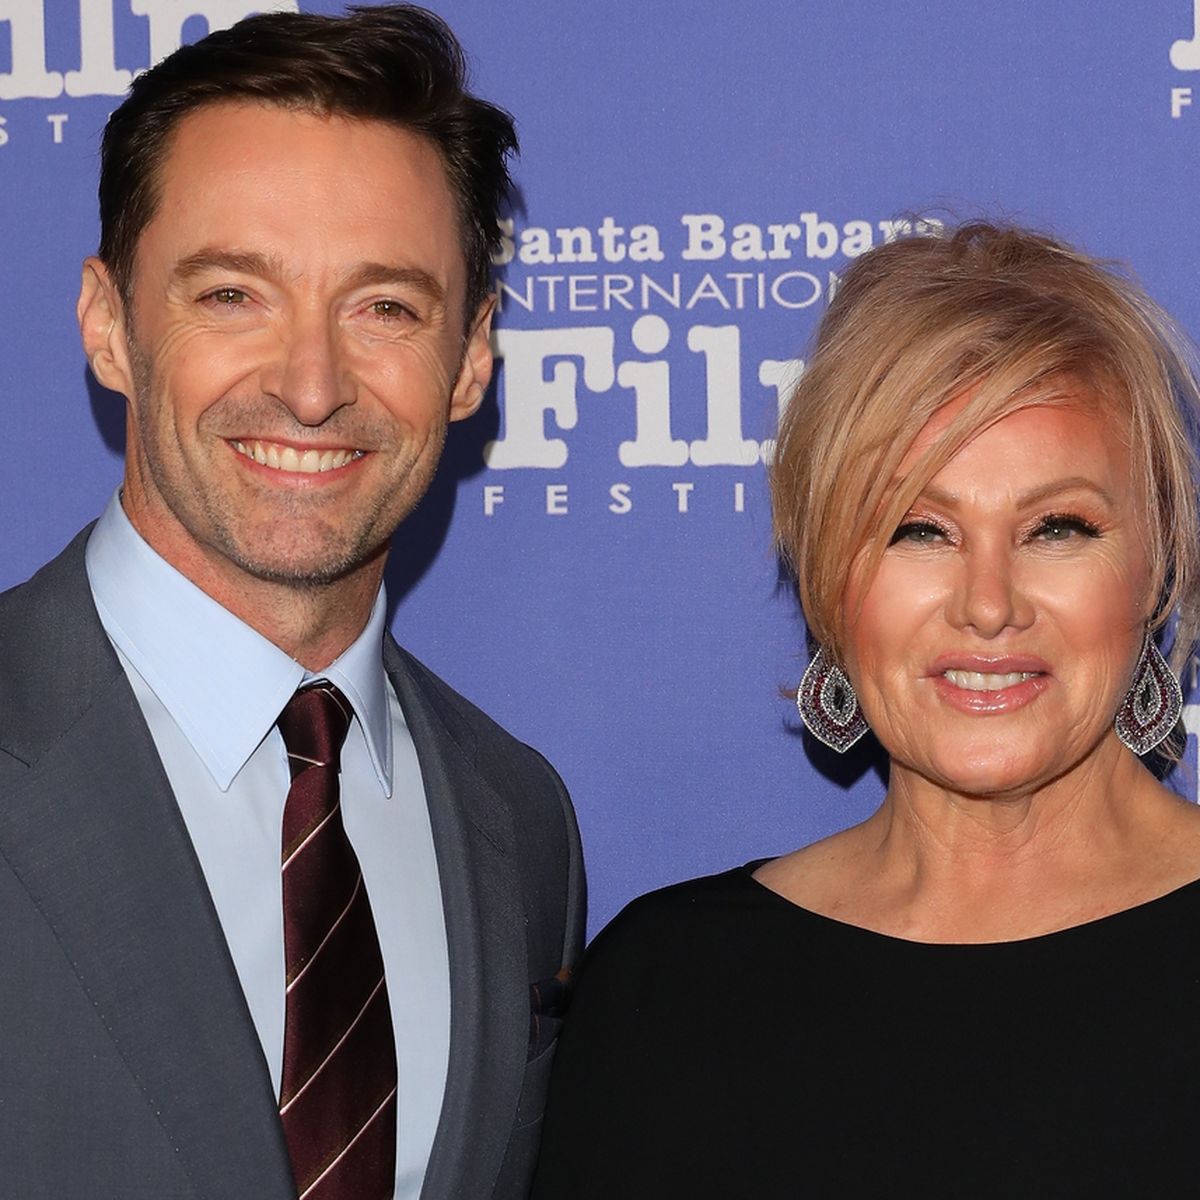 Celebrity Love Stories | Love Stories: Hugh Jackman's romance with Deborra-lee  Furness began with a crush and Crêpes Suzette - 9Honey